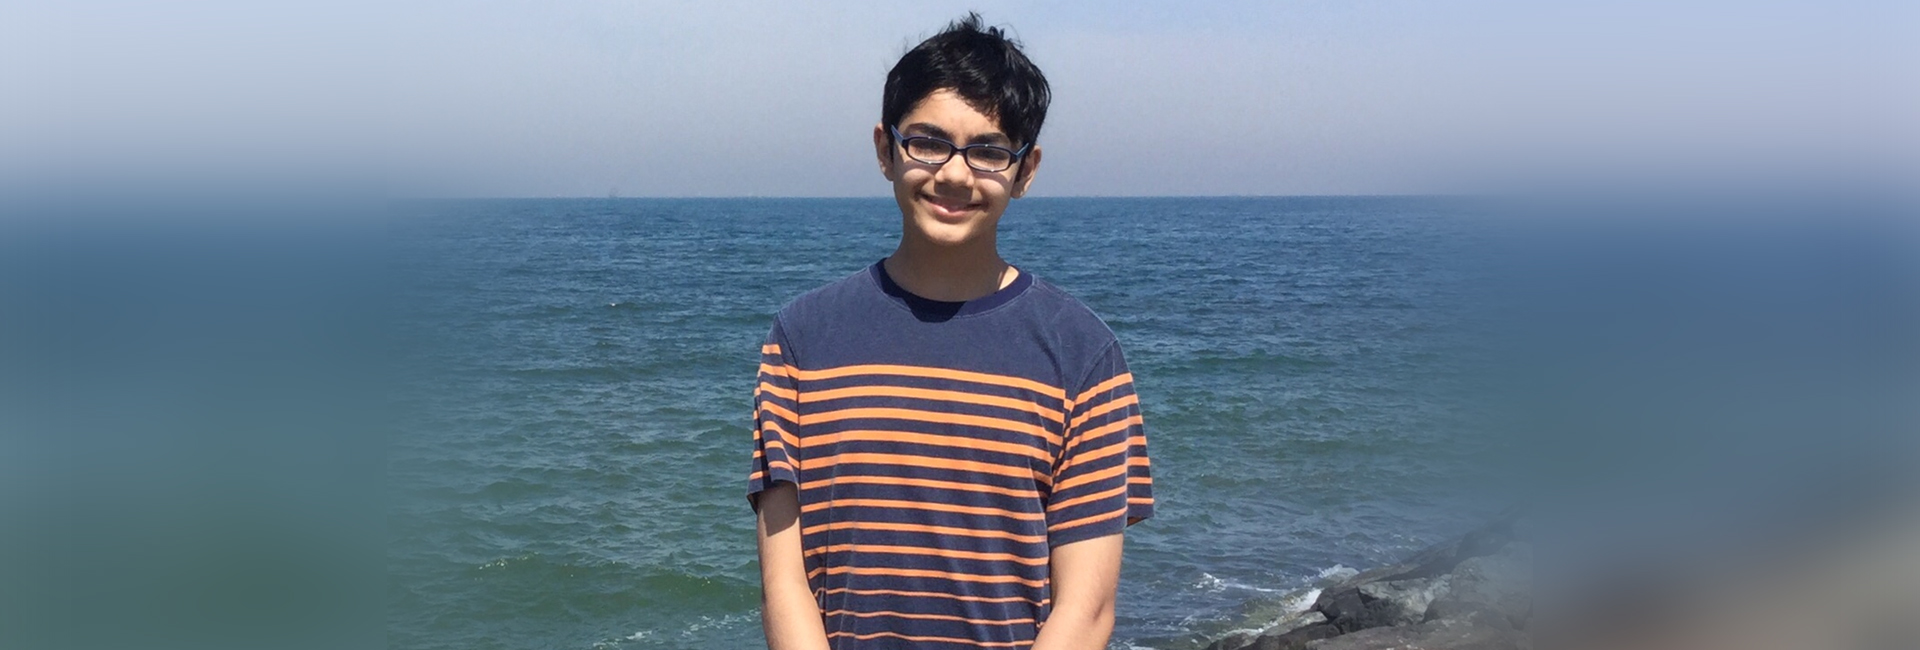 Nine-year-old college student at American River College in Sacramento, Tanishq Abraham talks about being the youngest person in his college. The home-schooled kid was also the youngest poster presenter and speaker at a NASA conference.